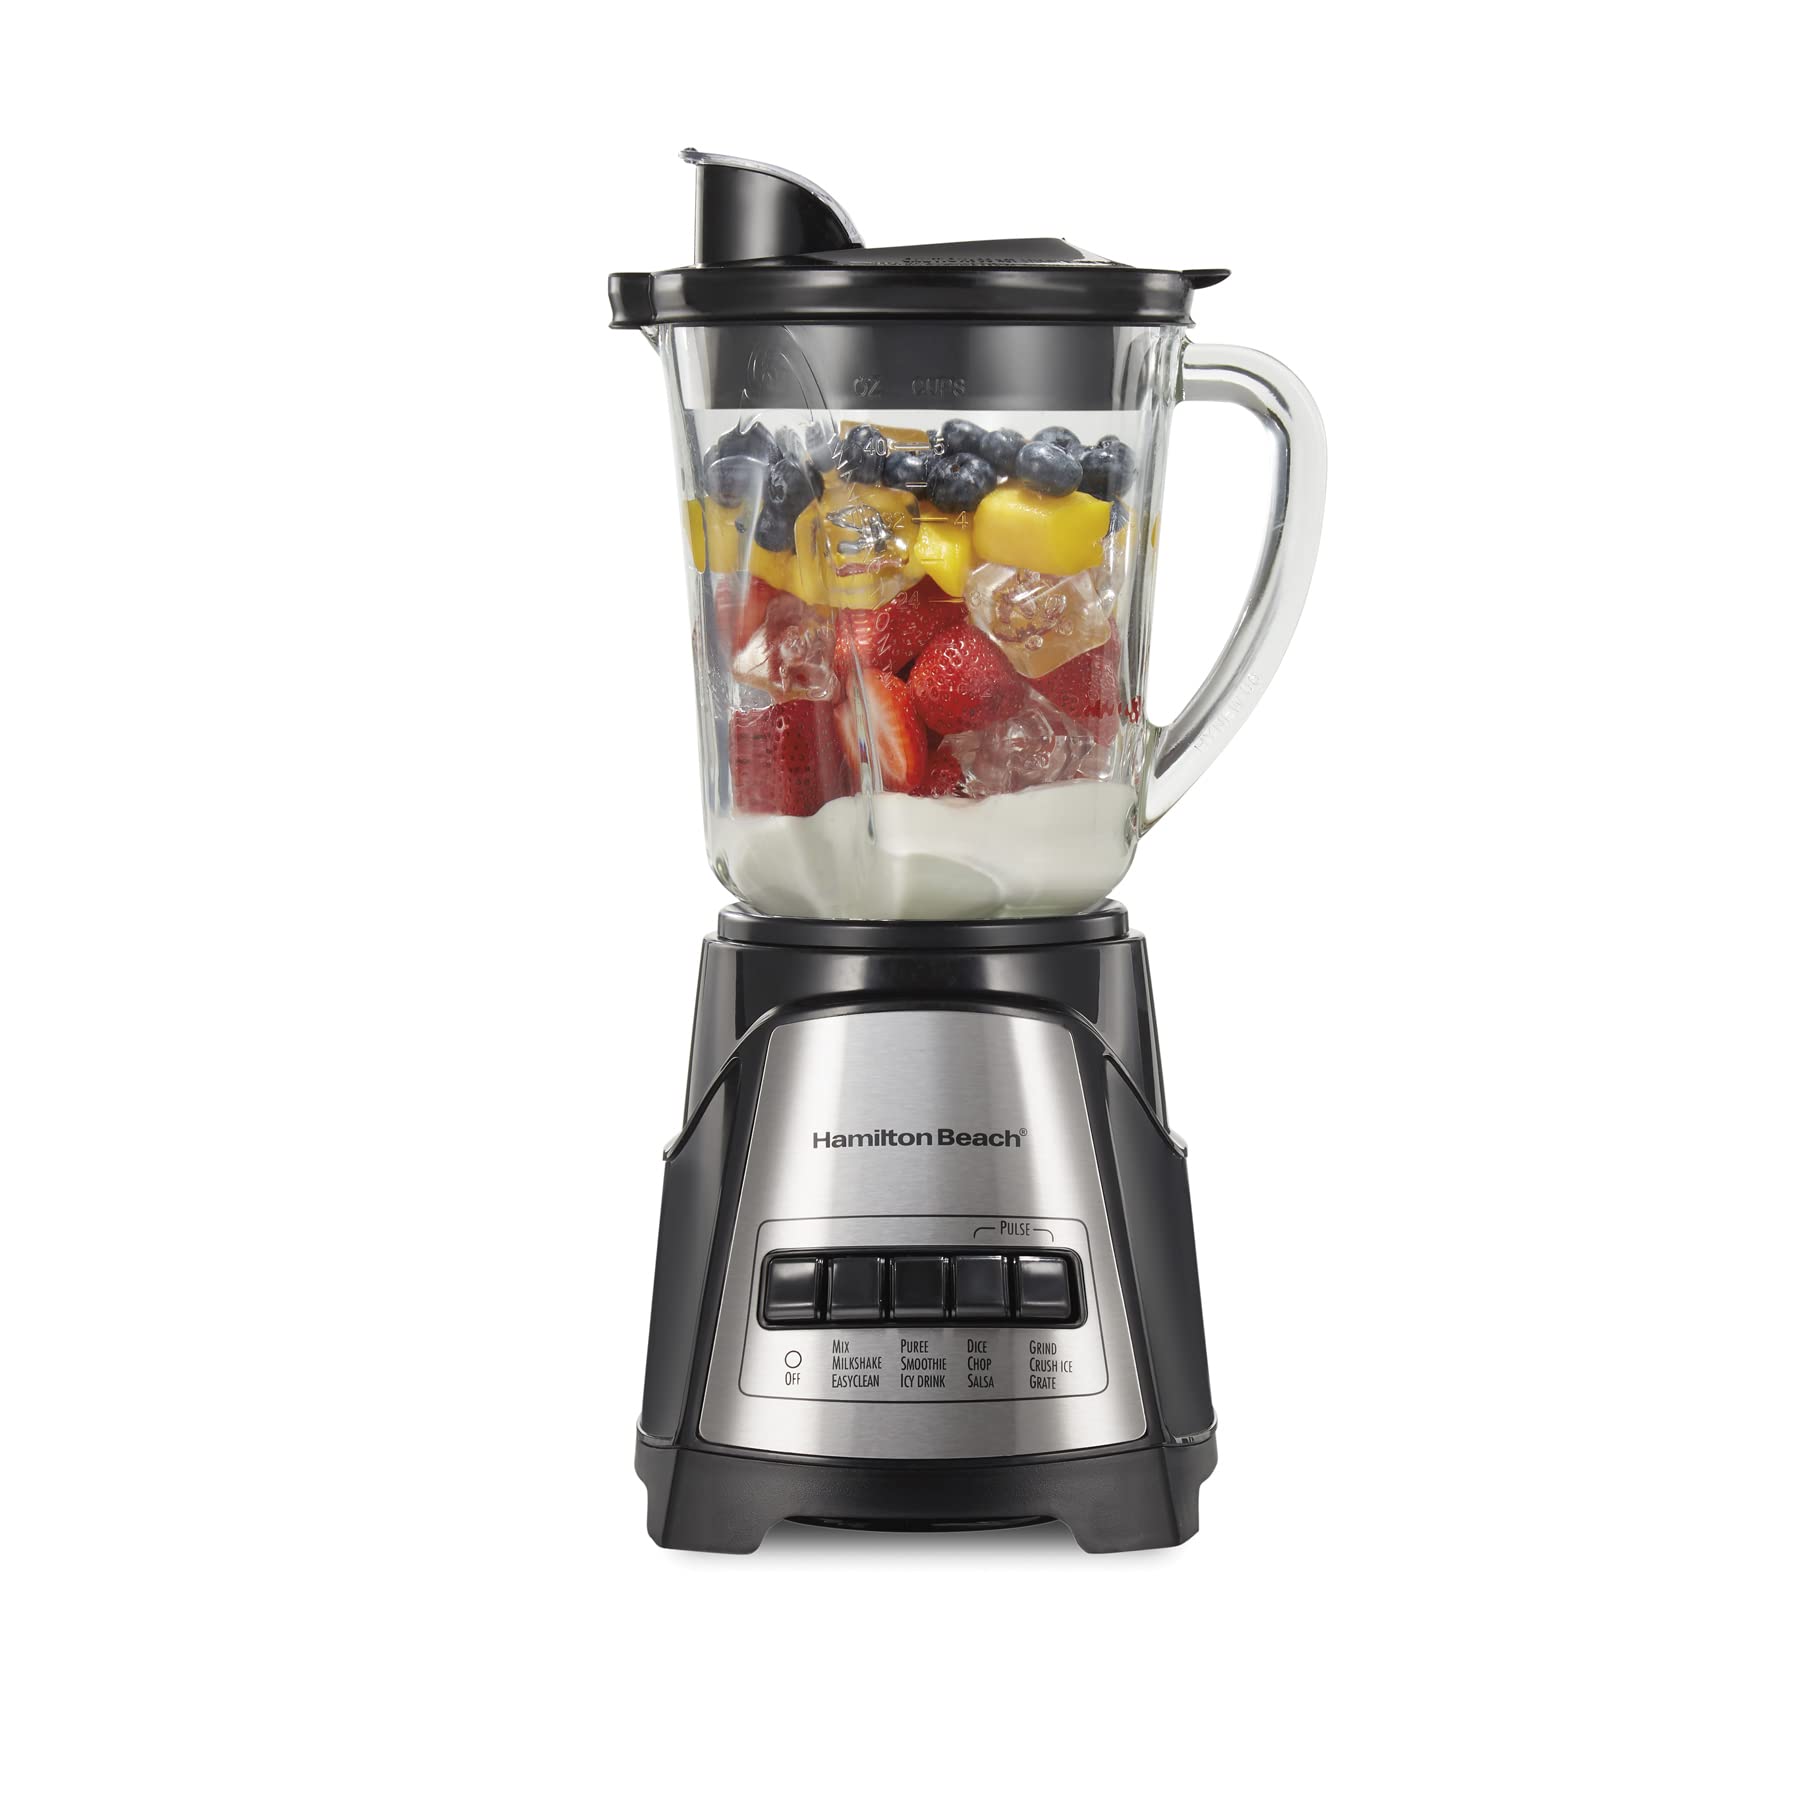 Hamilton Beach Power Elite Wave Action Blender for Shakes and Smoothies, Puree, Crush Ice, 40 Oz Glass Jar, 12 Functions, Stainless Steel Ice Sabre-Blades, Black (58148A)